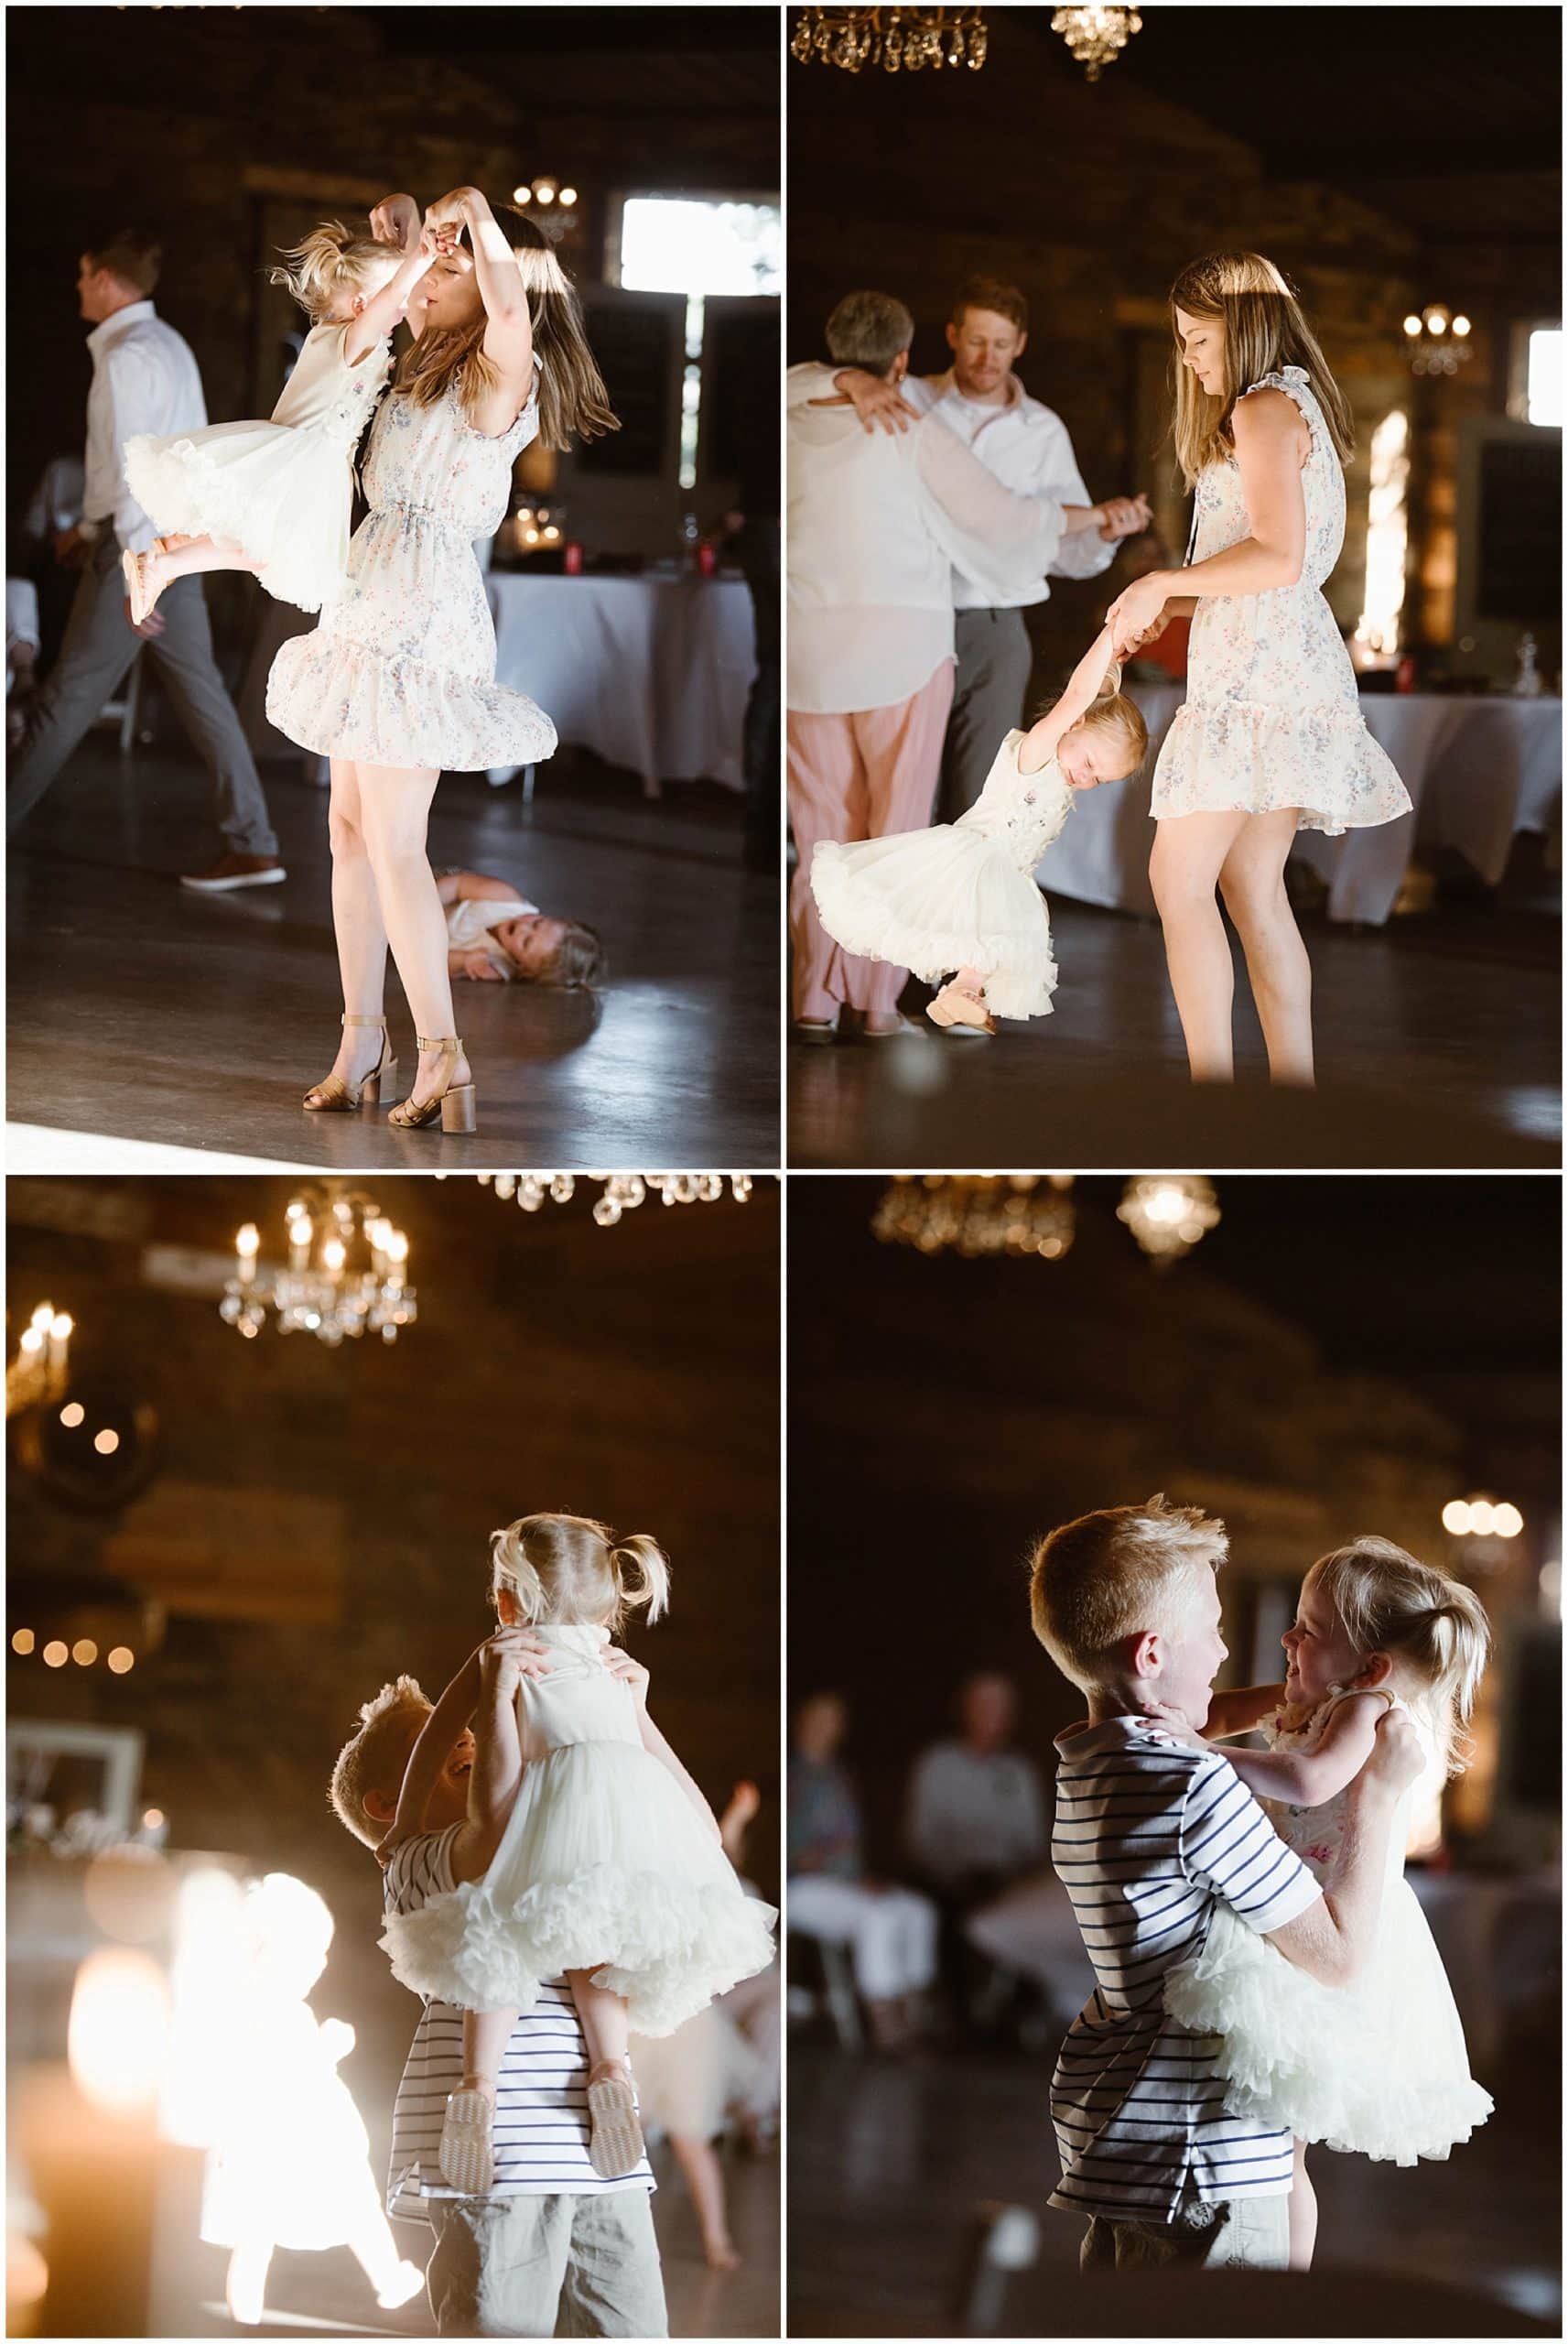 guests dancing at wedding, Brit Nicole Photography, West Texas Barn Wedding, West Texas Small Wedding, West Texas wedding venue, DJ Platinum, Vera Wang engagement ring, Zales Manly Bands wedding ring, David's Bridal wedding dress, Krazy Cakes brides wedding cake, wedding cupcake, Betsey Johnson wedding high heels, Joy's Downtown Flowers wedding decor, Sparrow Creek Ranch, texas wedding ranch, places to get married in Texas, small intimate wedding, summer wedding, texas sky, bride and groom first look, first look with dad, matching bridesmaids robes, June wedding, junebug weddings, wandering weddings, the knot, best weddings